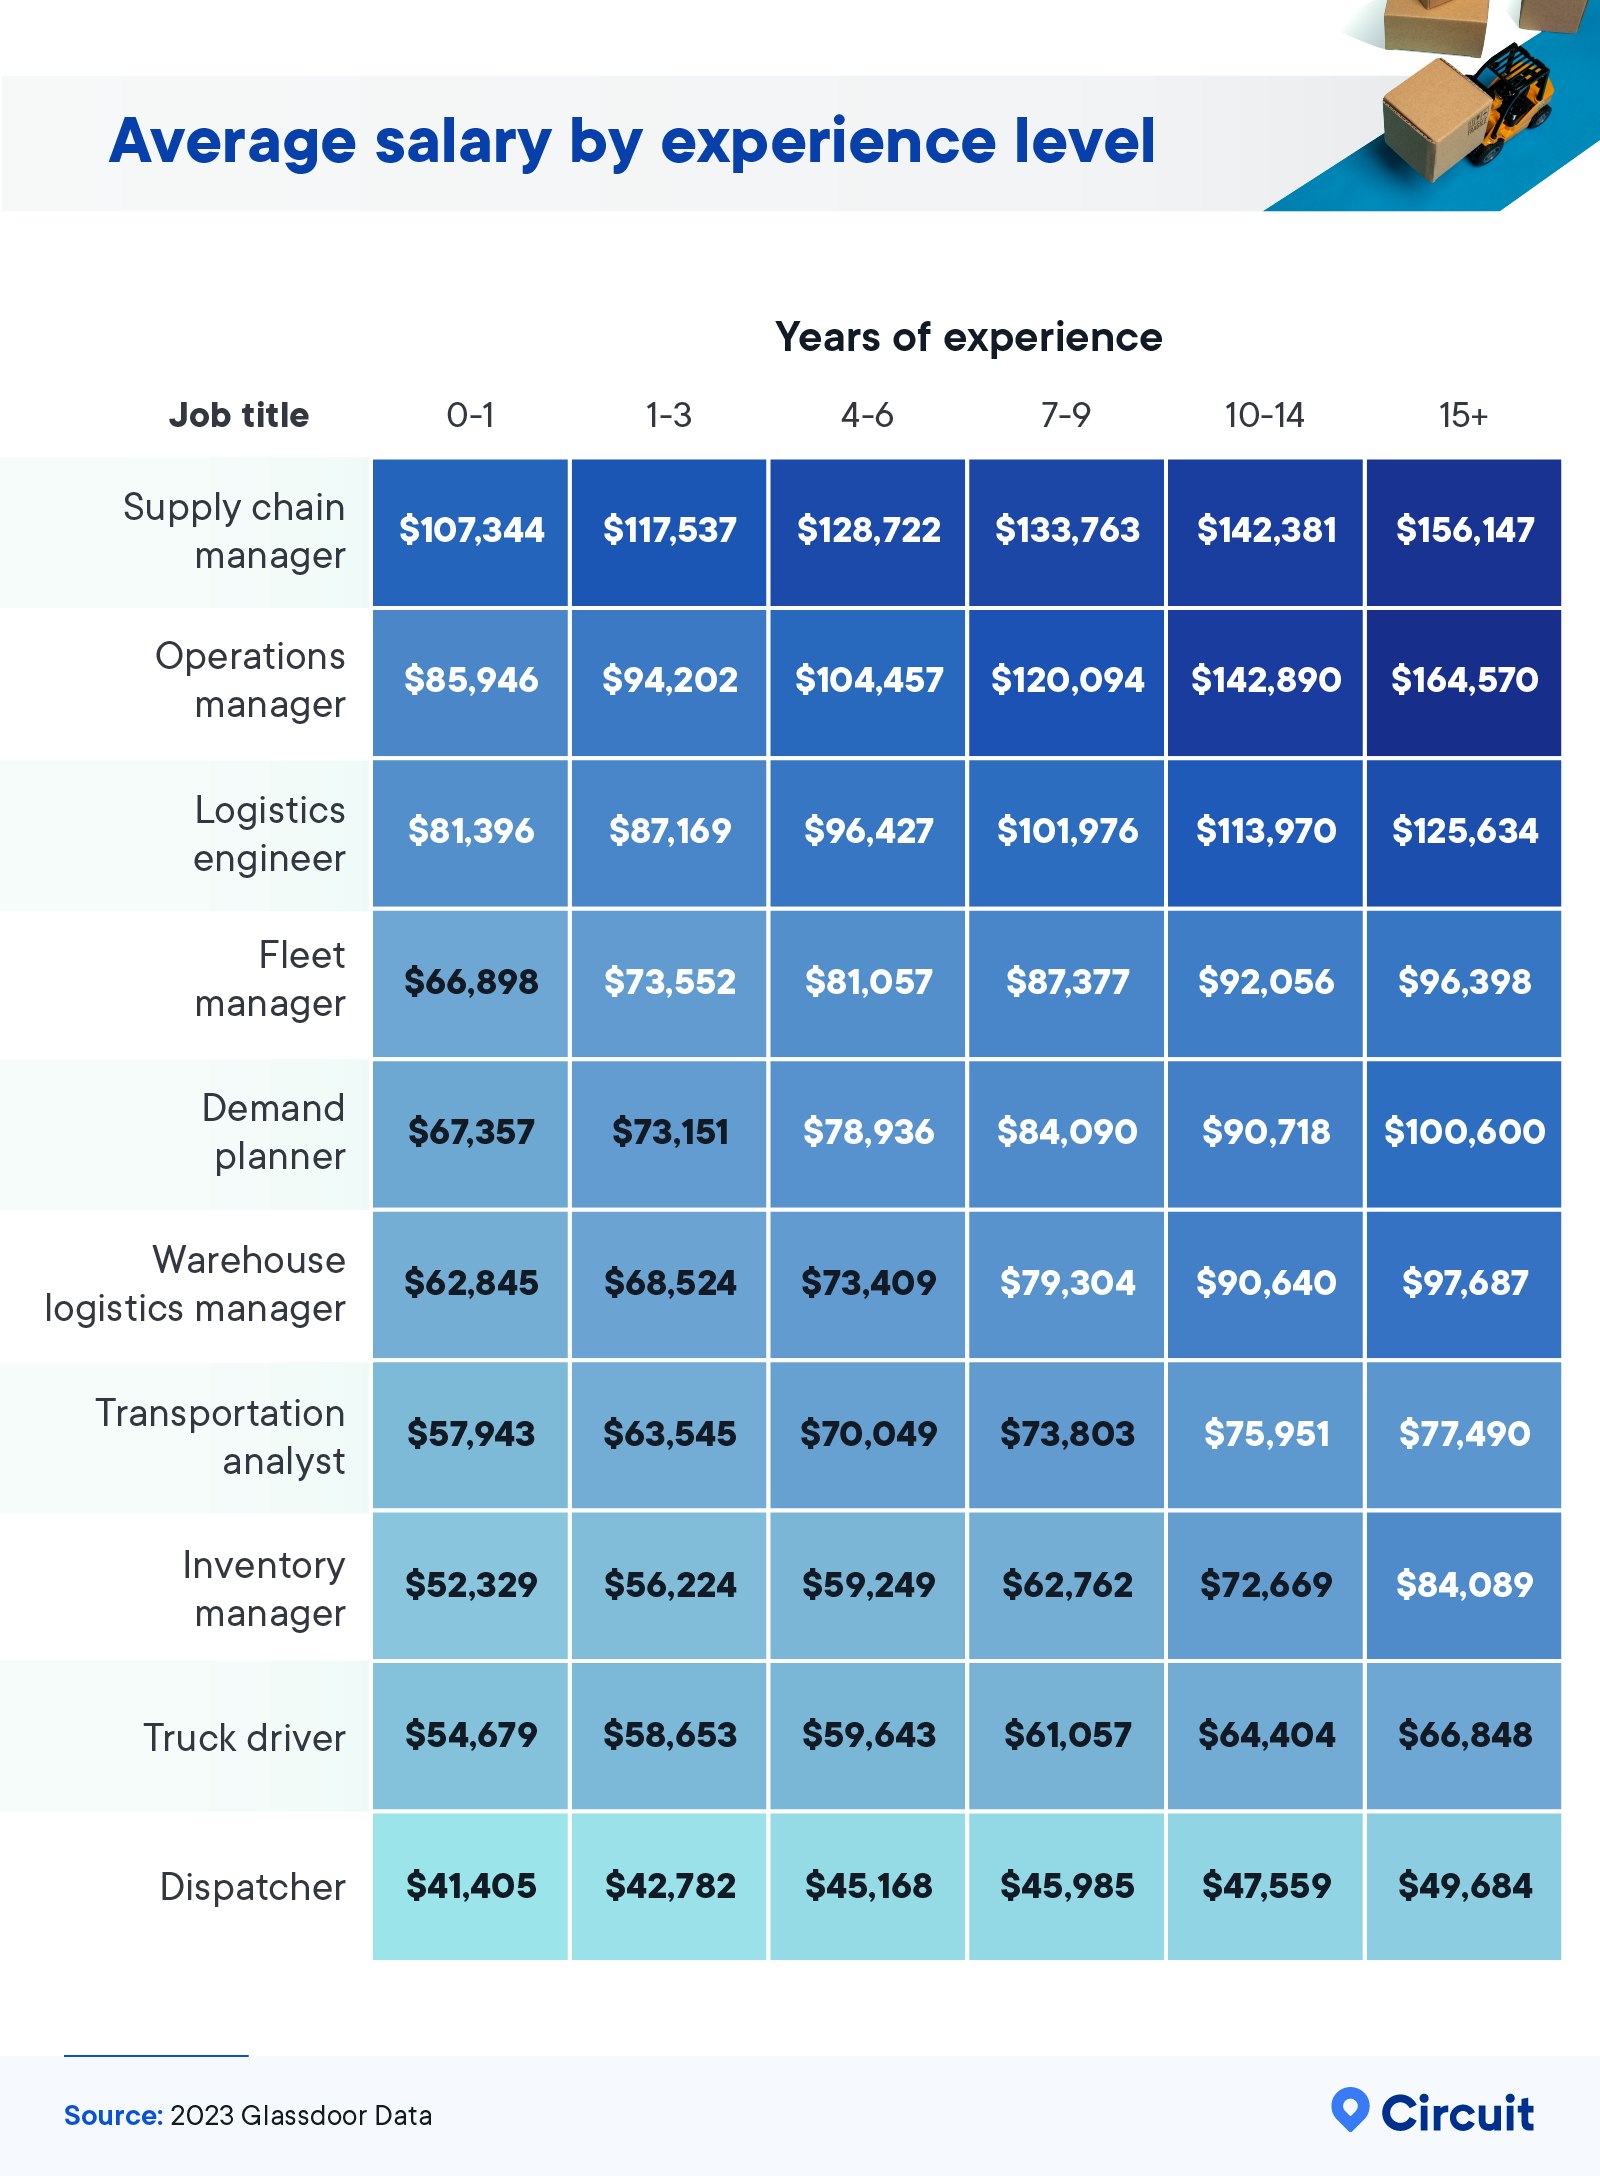 Average salary by experience level